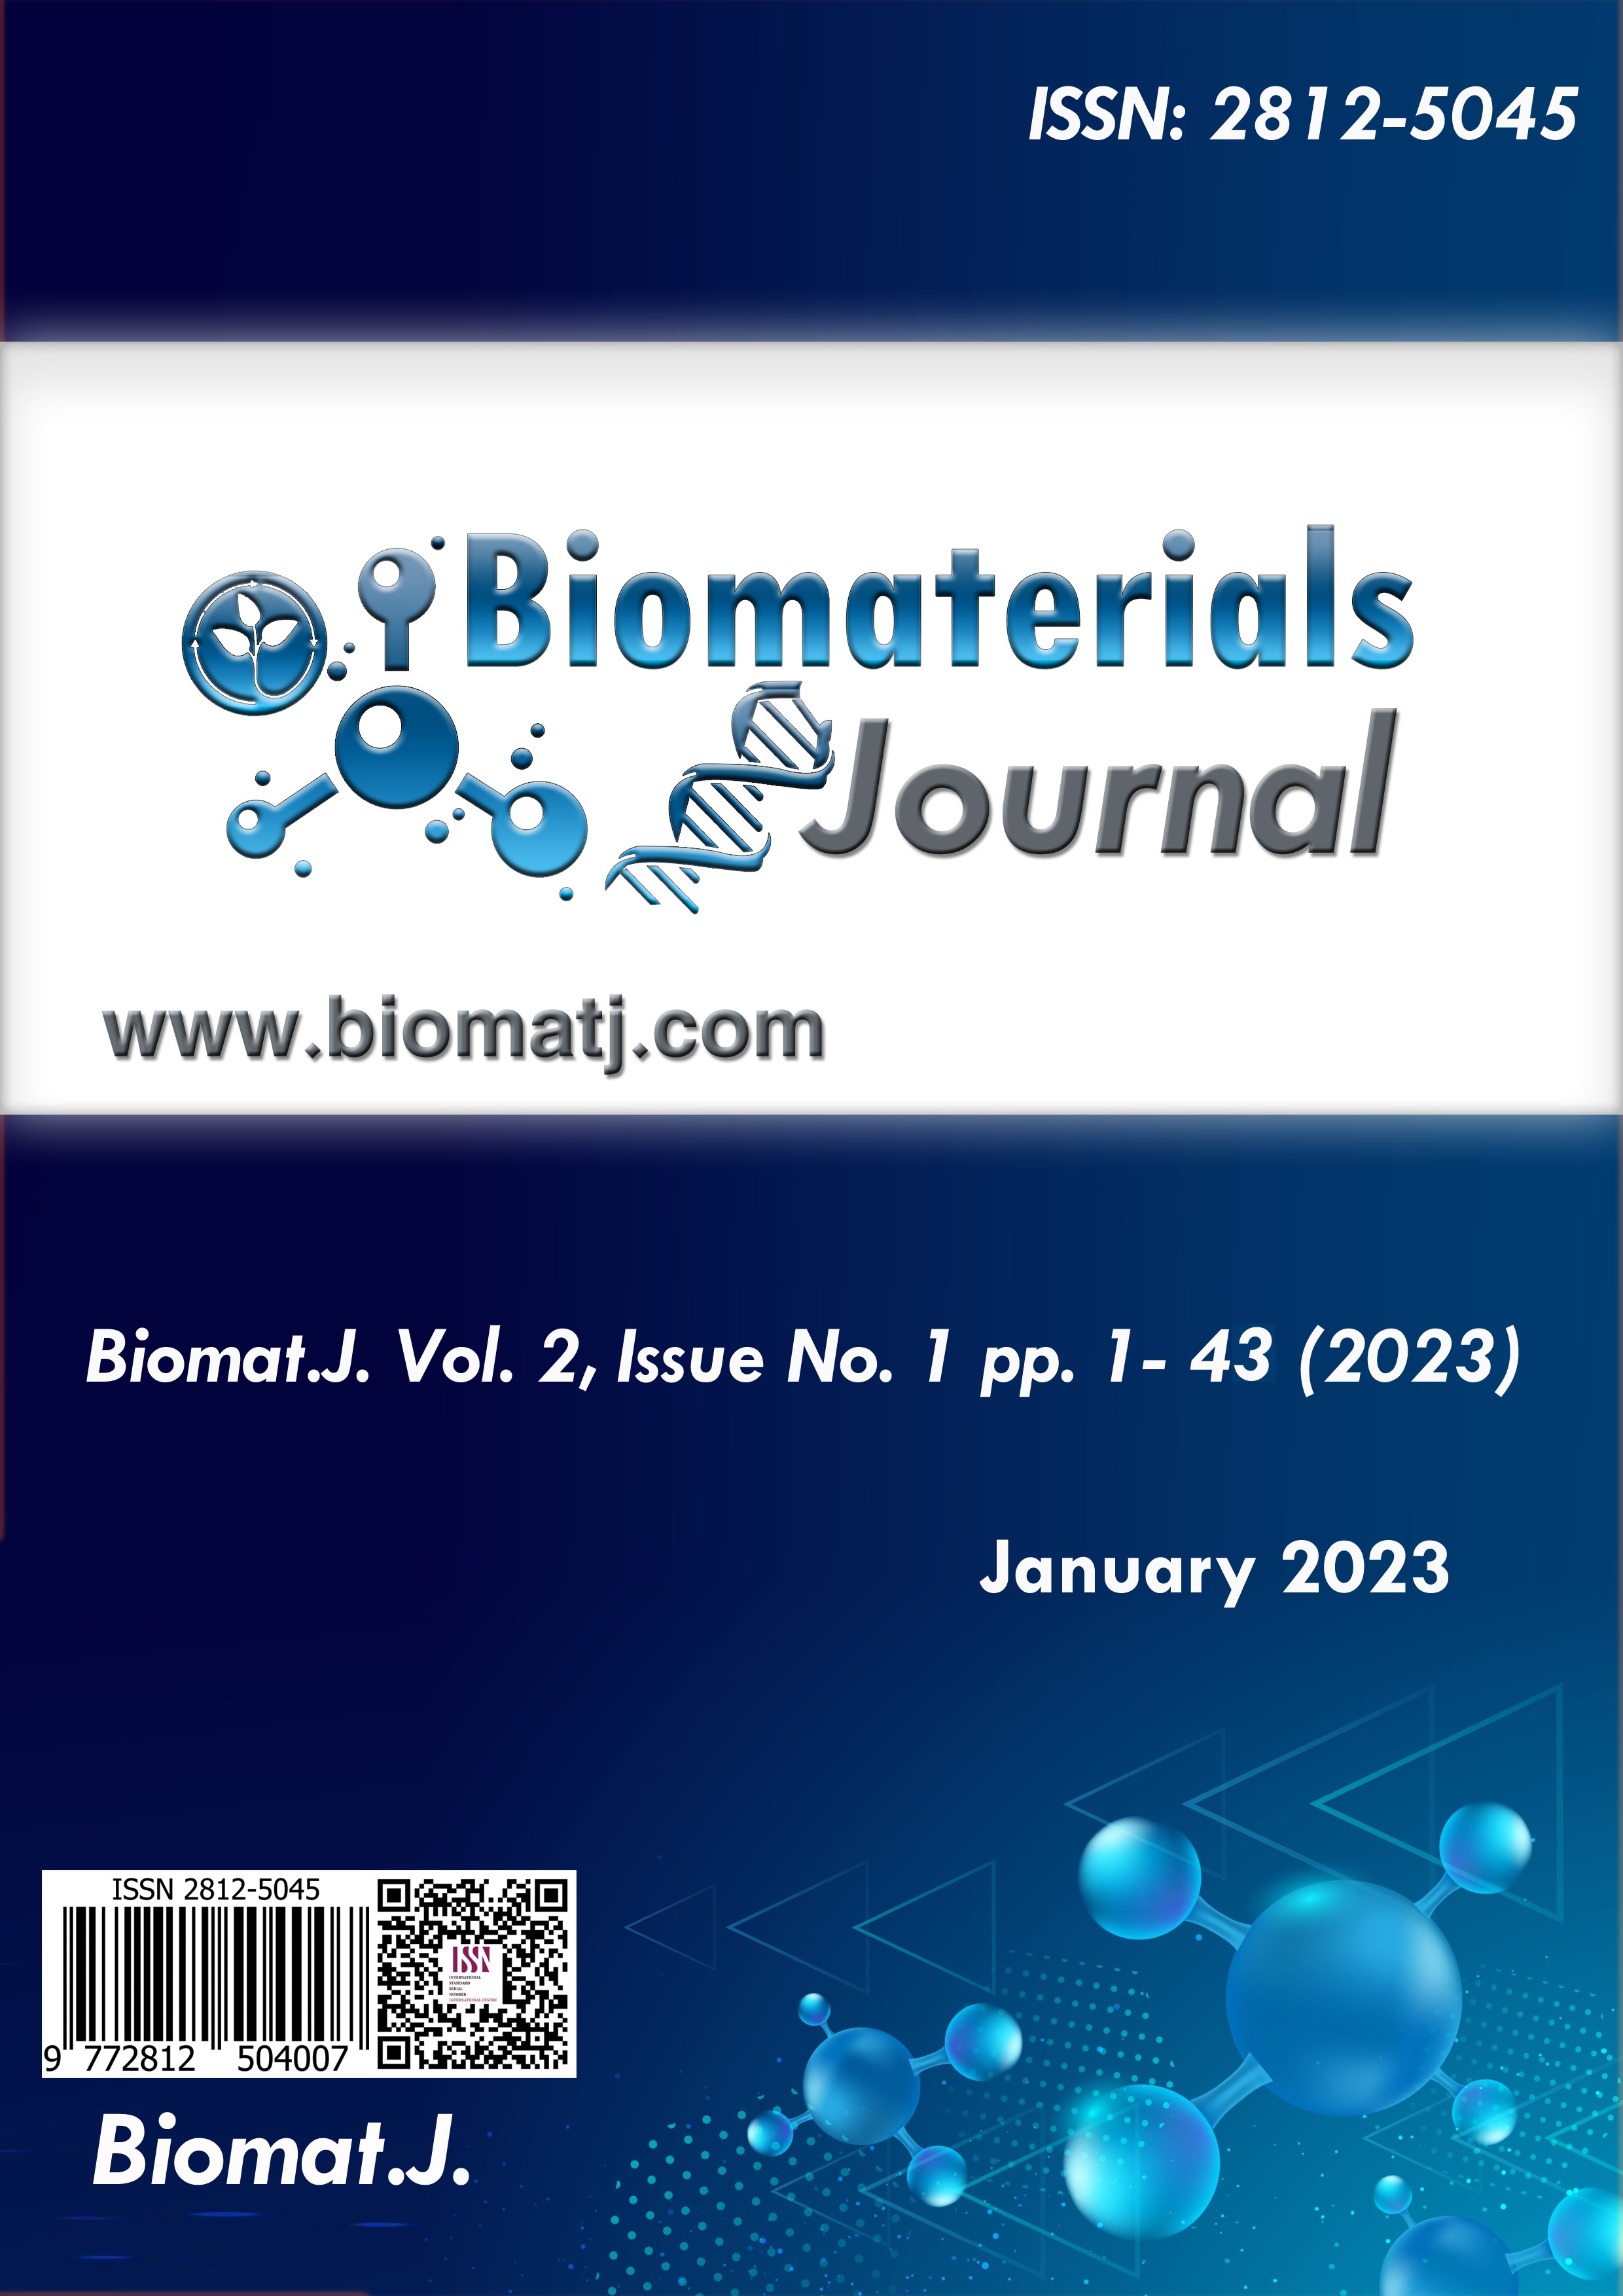 Biomaterials Journal Volume 2, Issue No. 1, January 2023